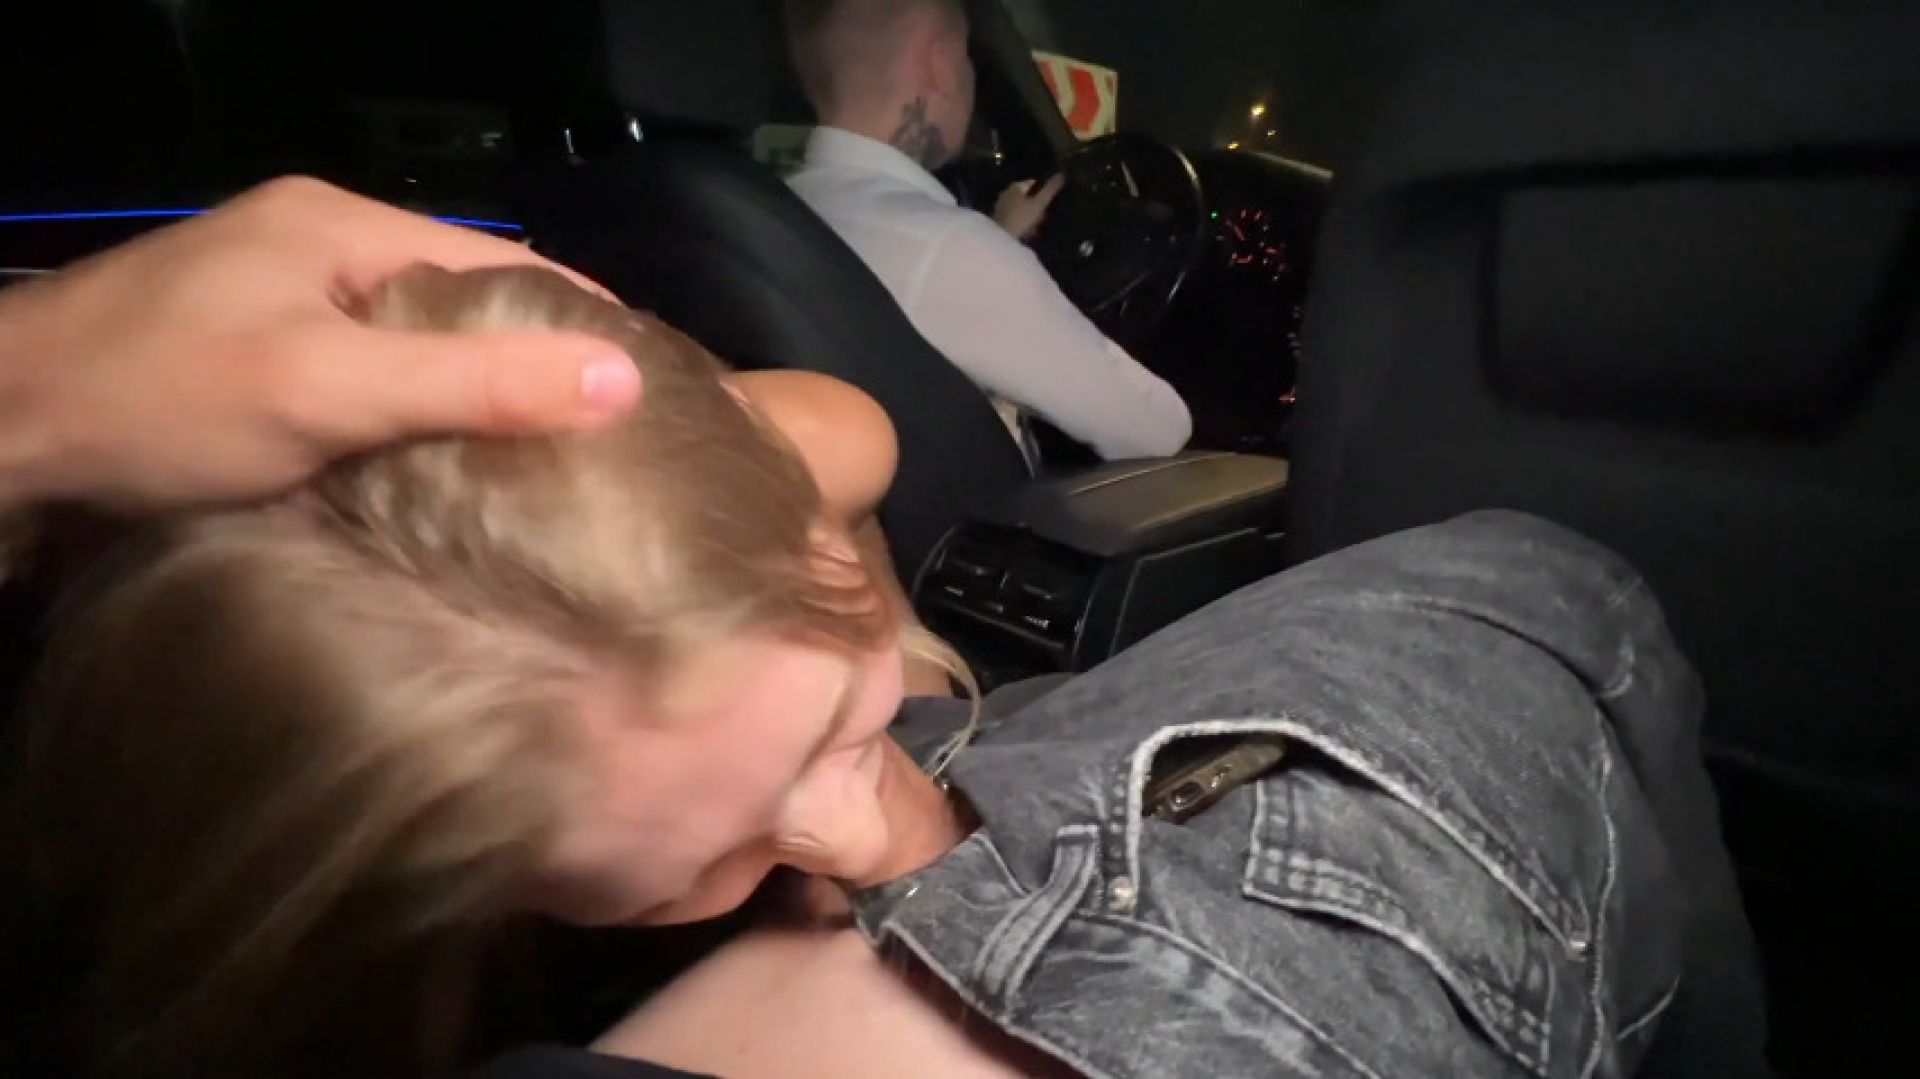 leaked Risky Public Sex in Taxi thumbnail